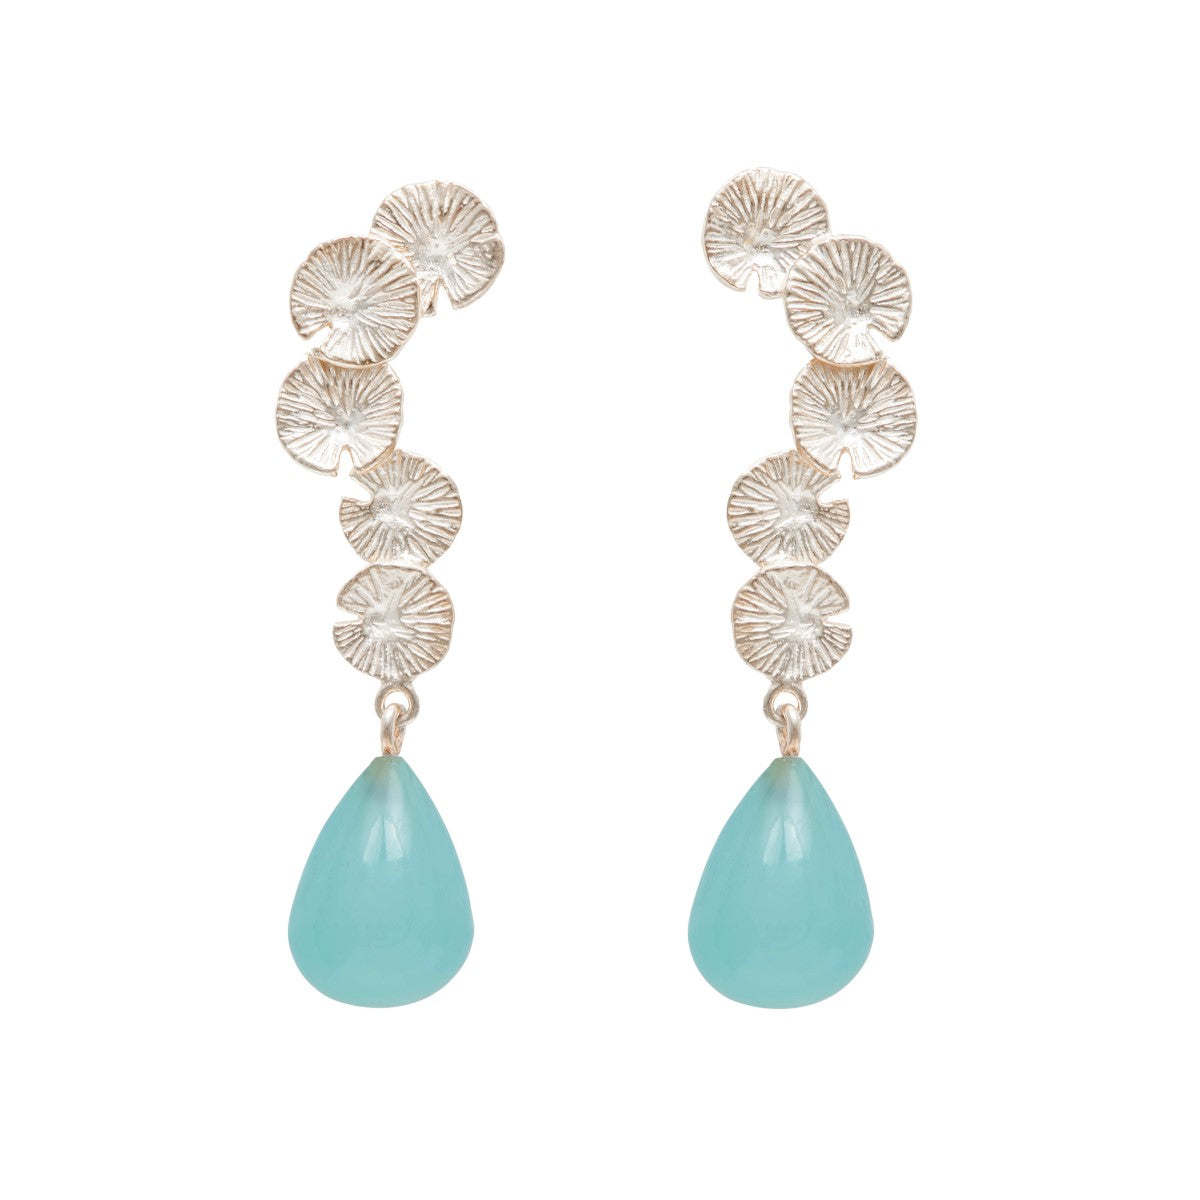 Lily Pad Earrings in Sterling Silver with an Aqua Chalcedony Stone Drop